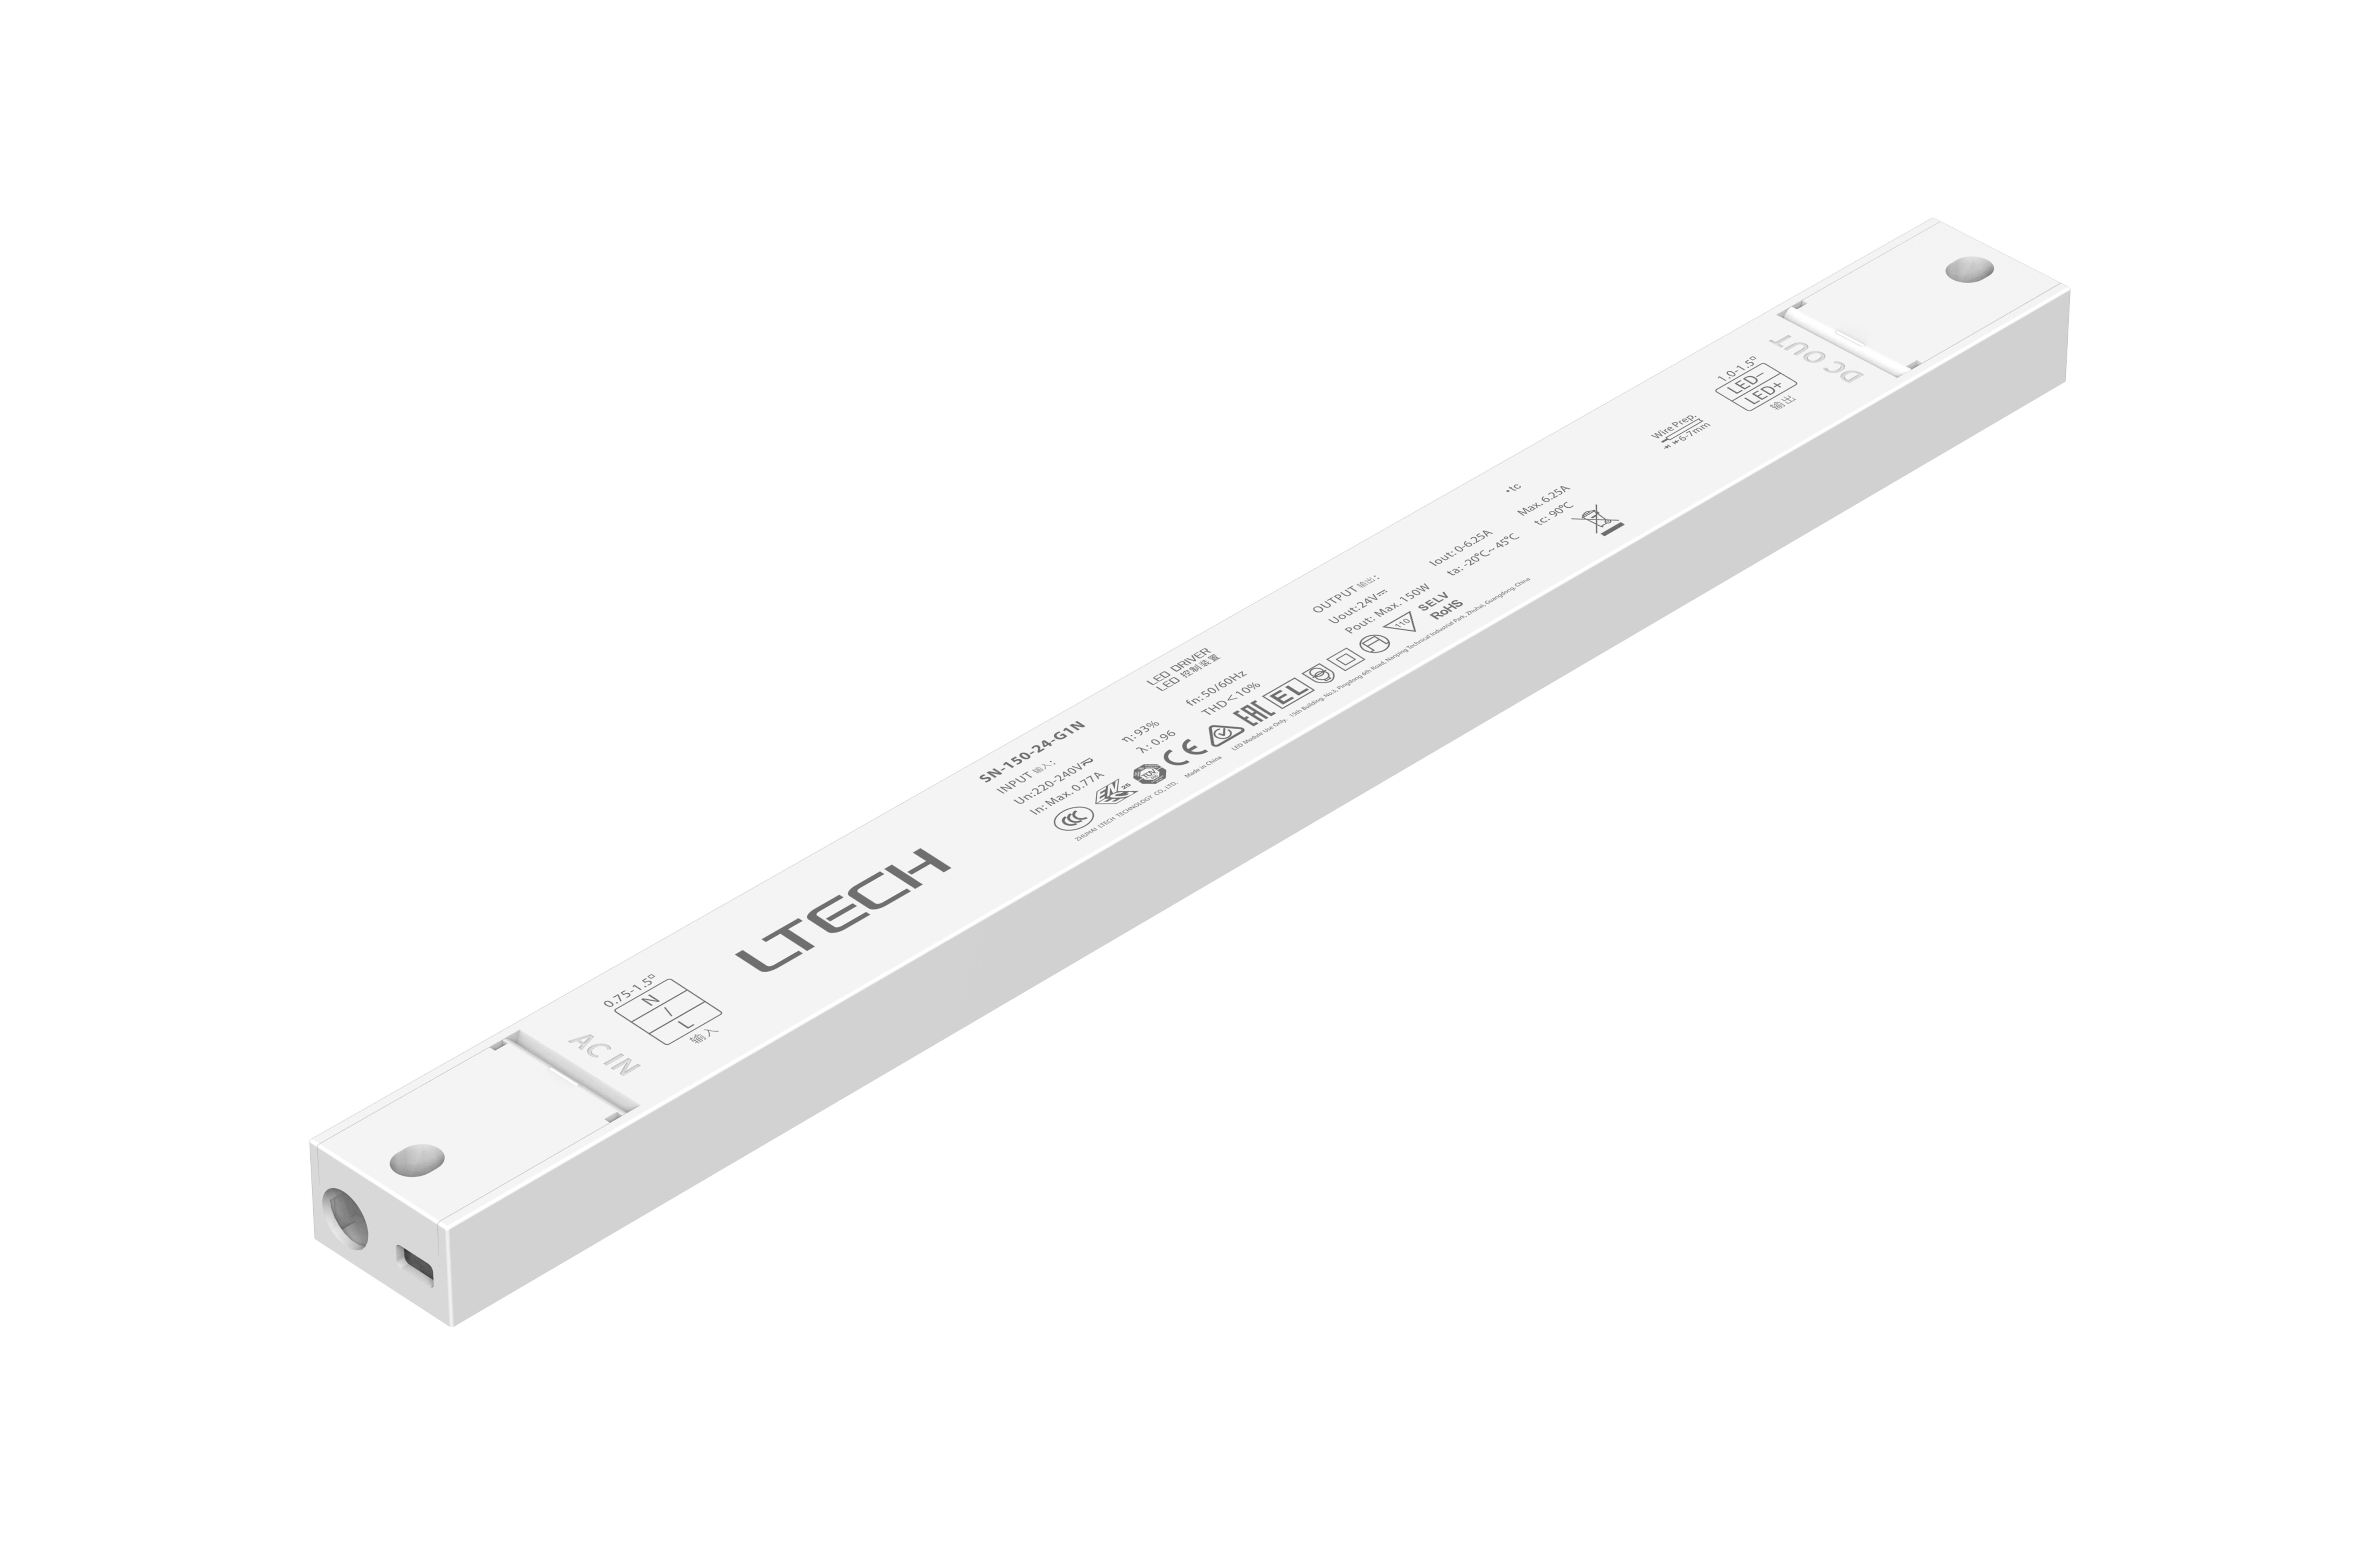 SN-150-24-G1N  Intelligent Constant Voltage  LED Driver; ON/OFF; 150W; 24VDC 6.25A ; 220-240Vac; IP20; 5yrs Warrenty.